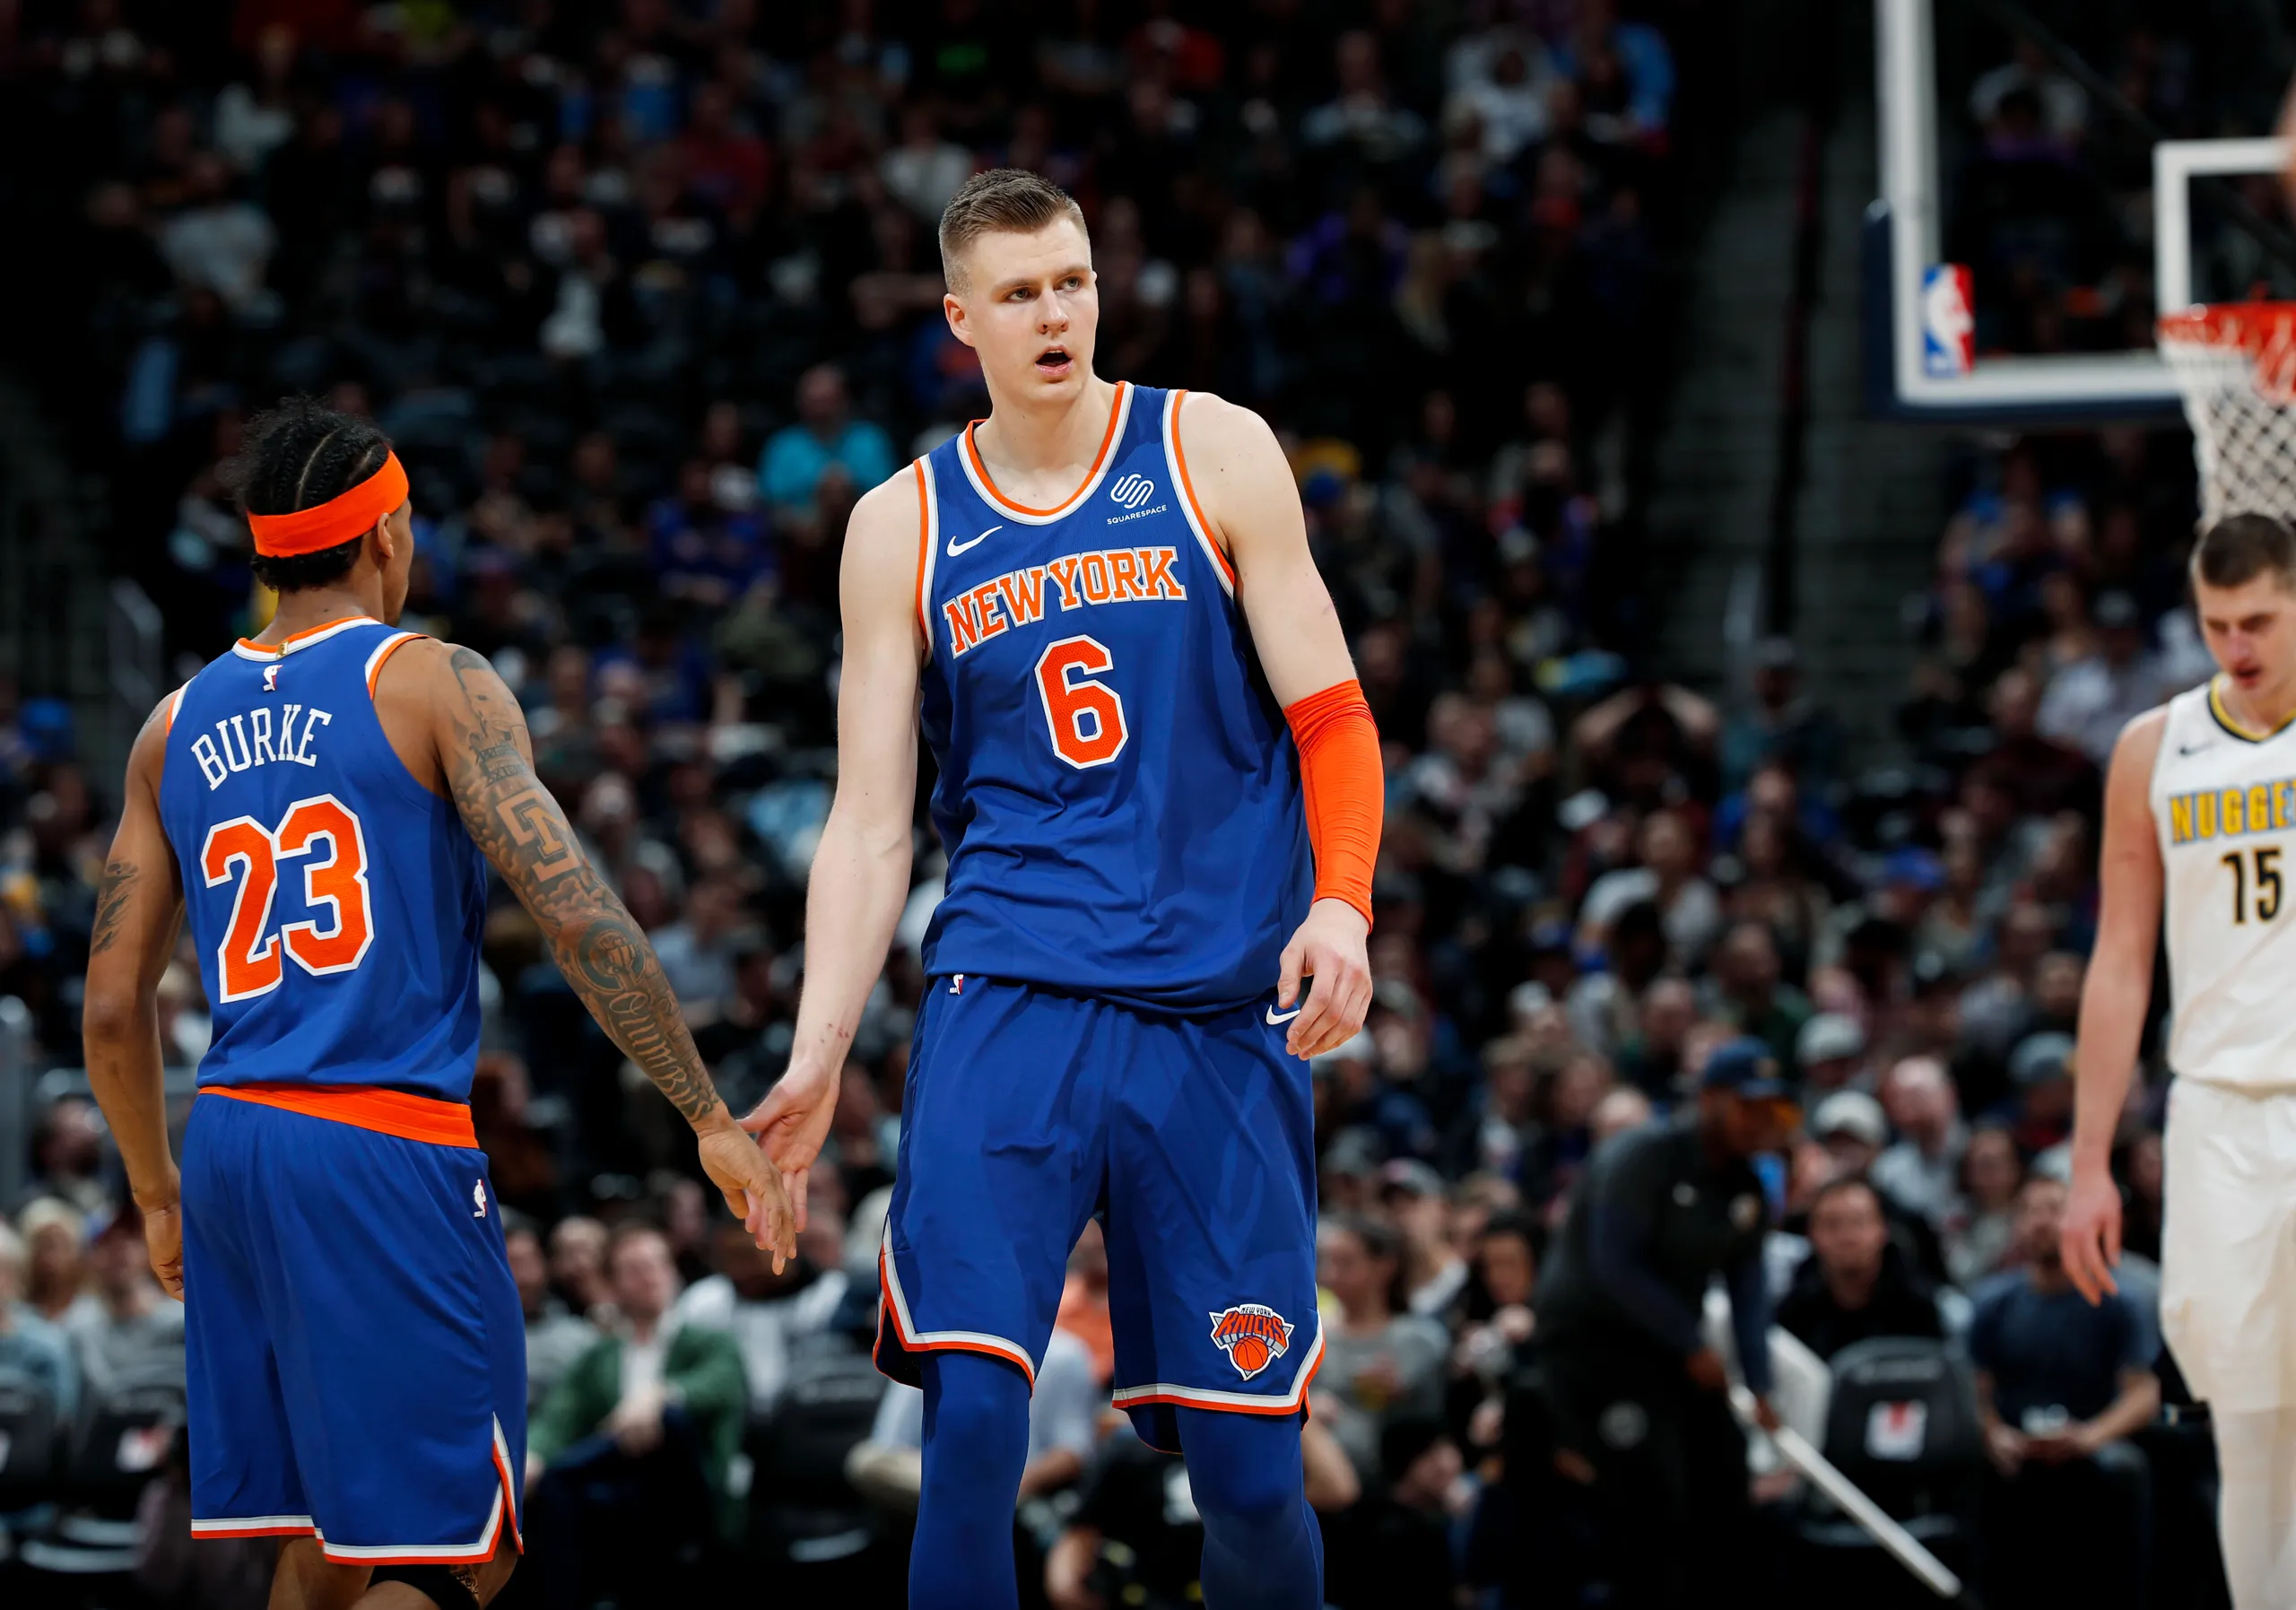 NBA News: Is Kristaps Porzingis Playing Tonight vs Pacers? The 7ft 3" Star's Injury Update Can Have a Huge Impact